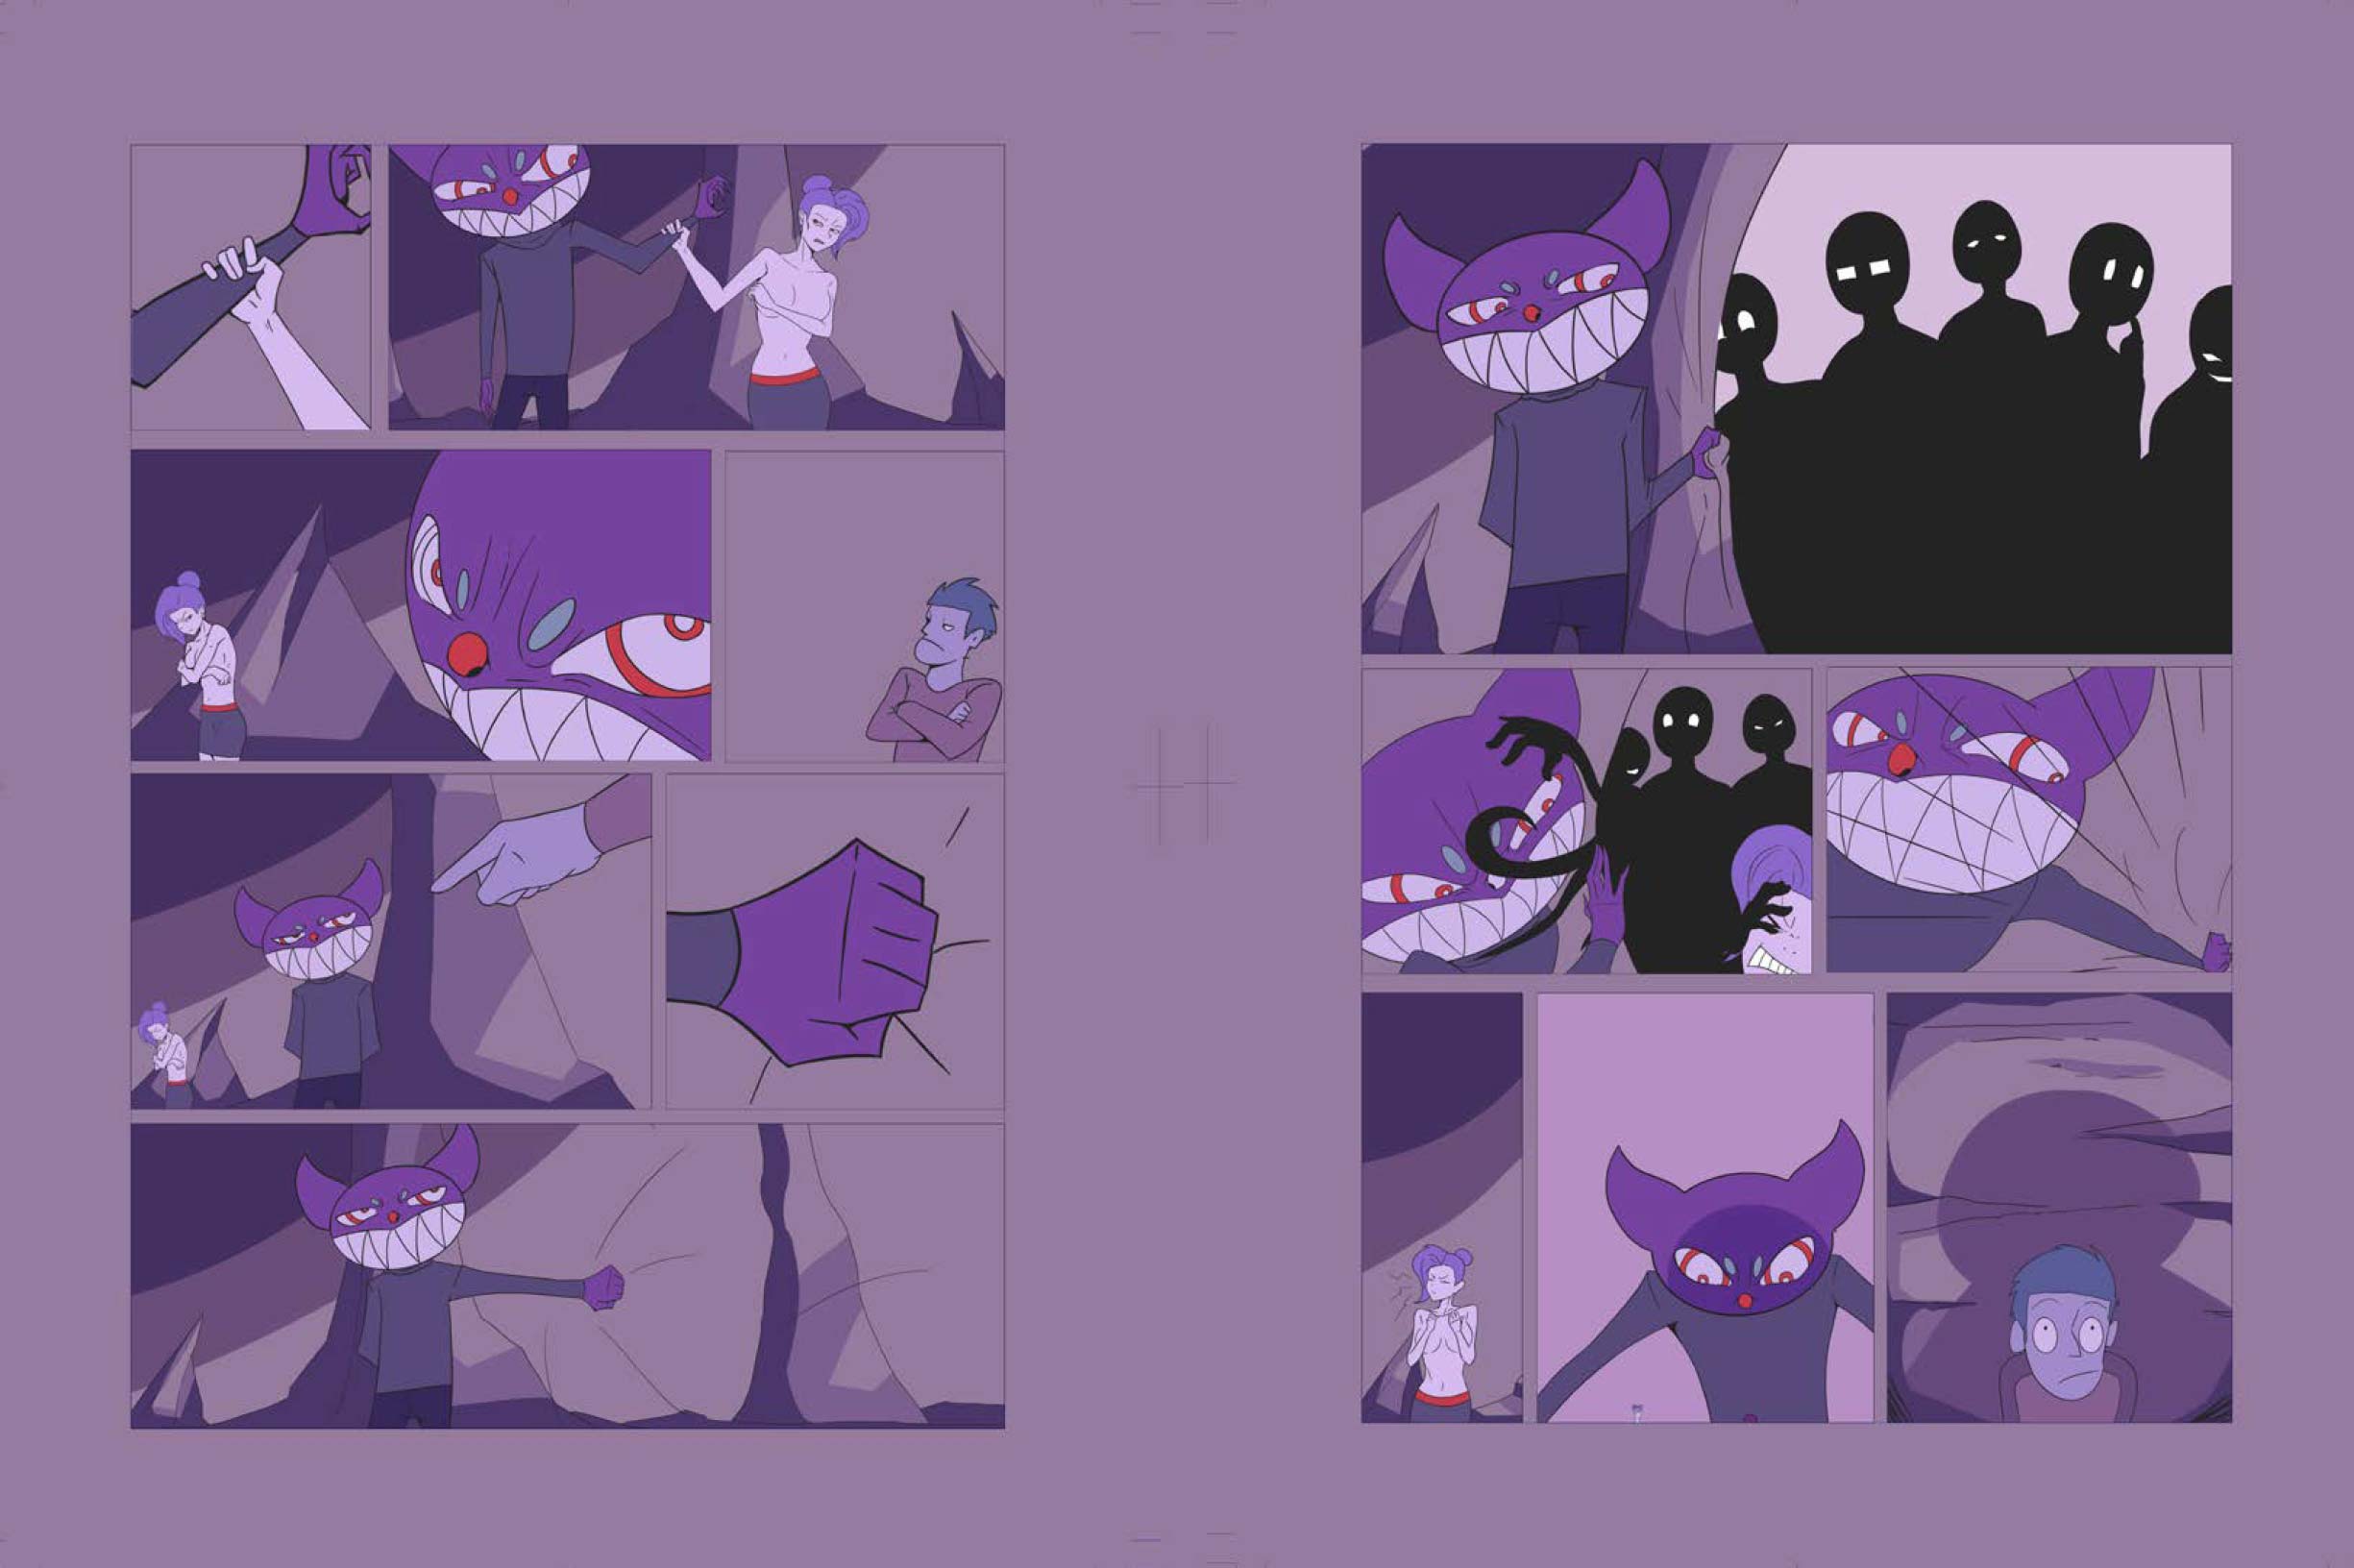 Two pages of comic are shown. The image is a digital illustration and is made using only the colours purple, red and black. The comic shows a demon like character pulling back a curtain to reveal an unidentified audience that appear as black sillohettes